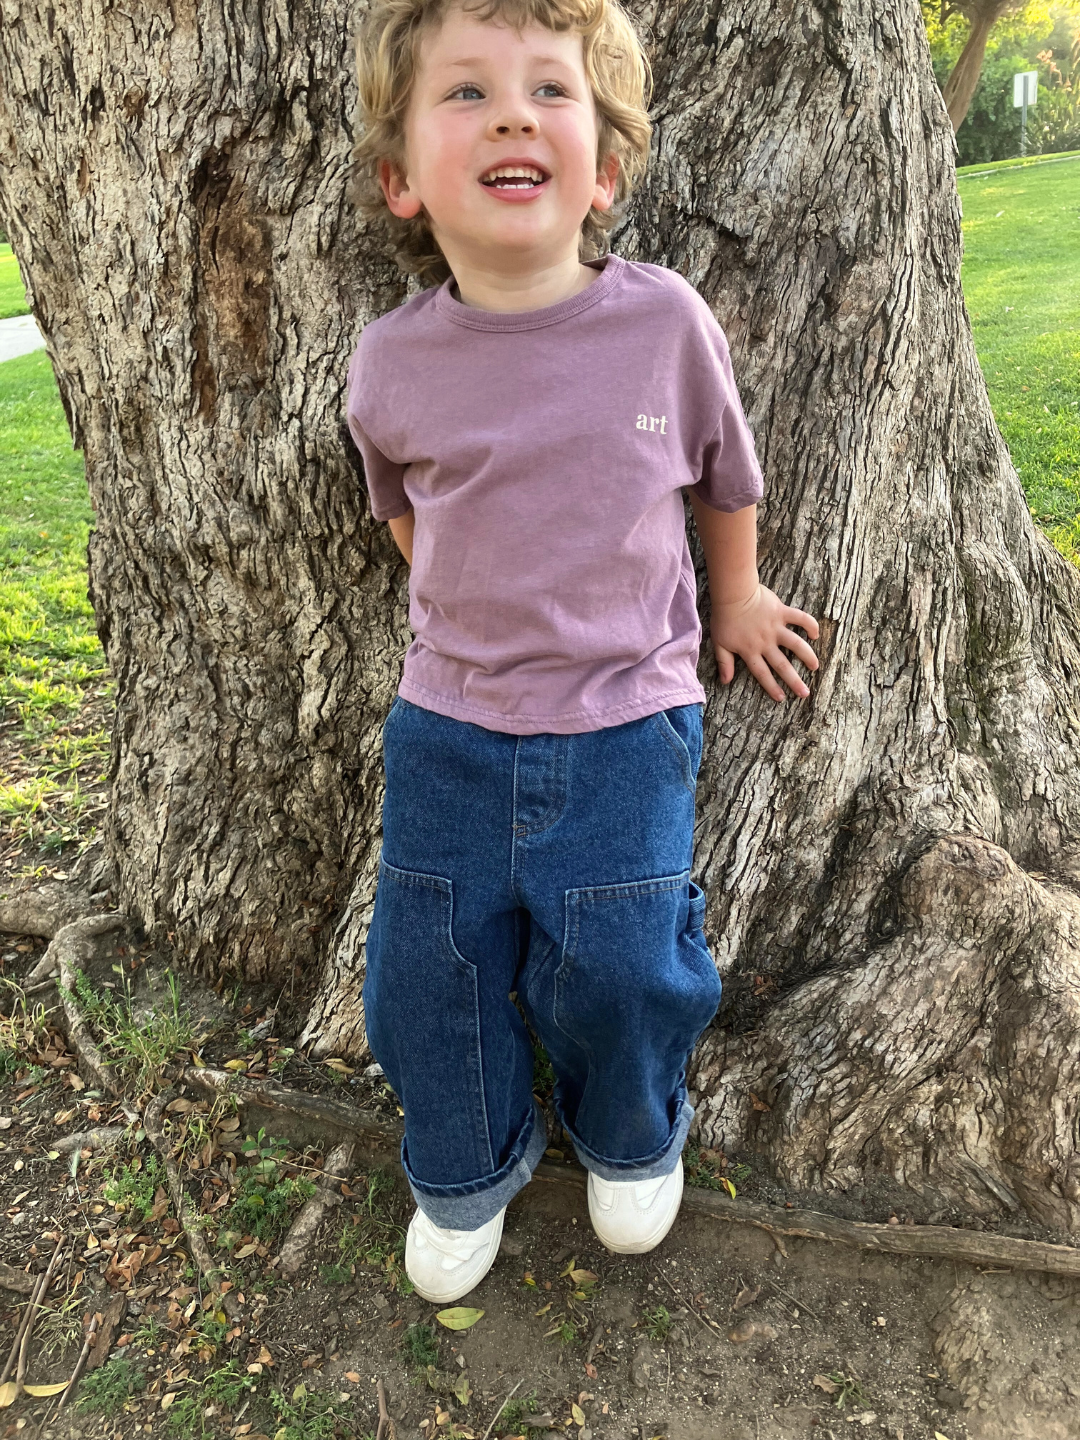 Mauve | A child is wearing the Studio Tee in Mauve with dark denim jeans and white sneakers, standing next to a tree